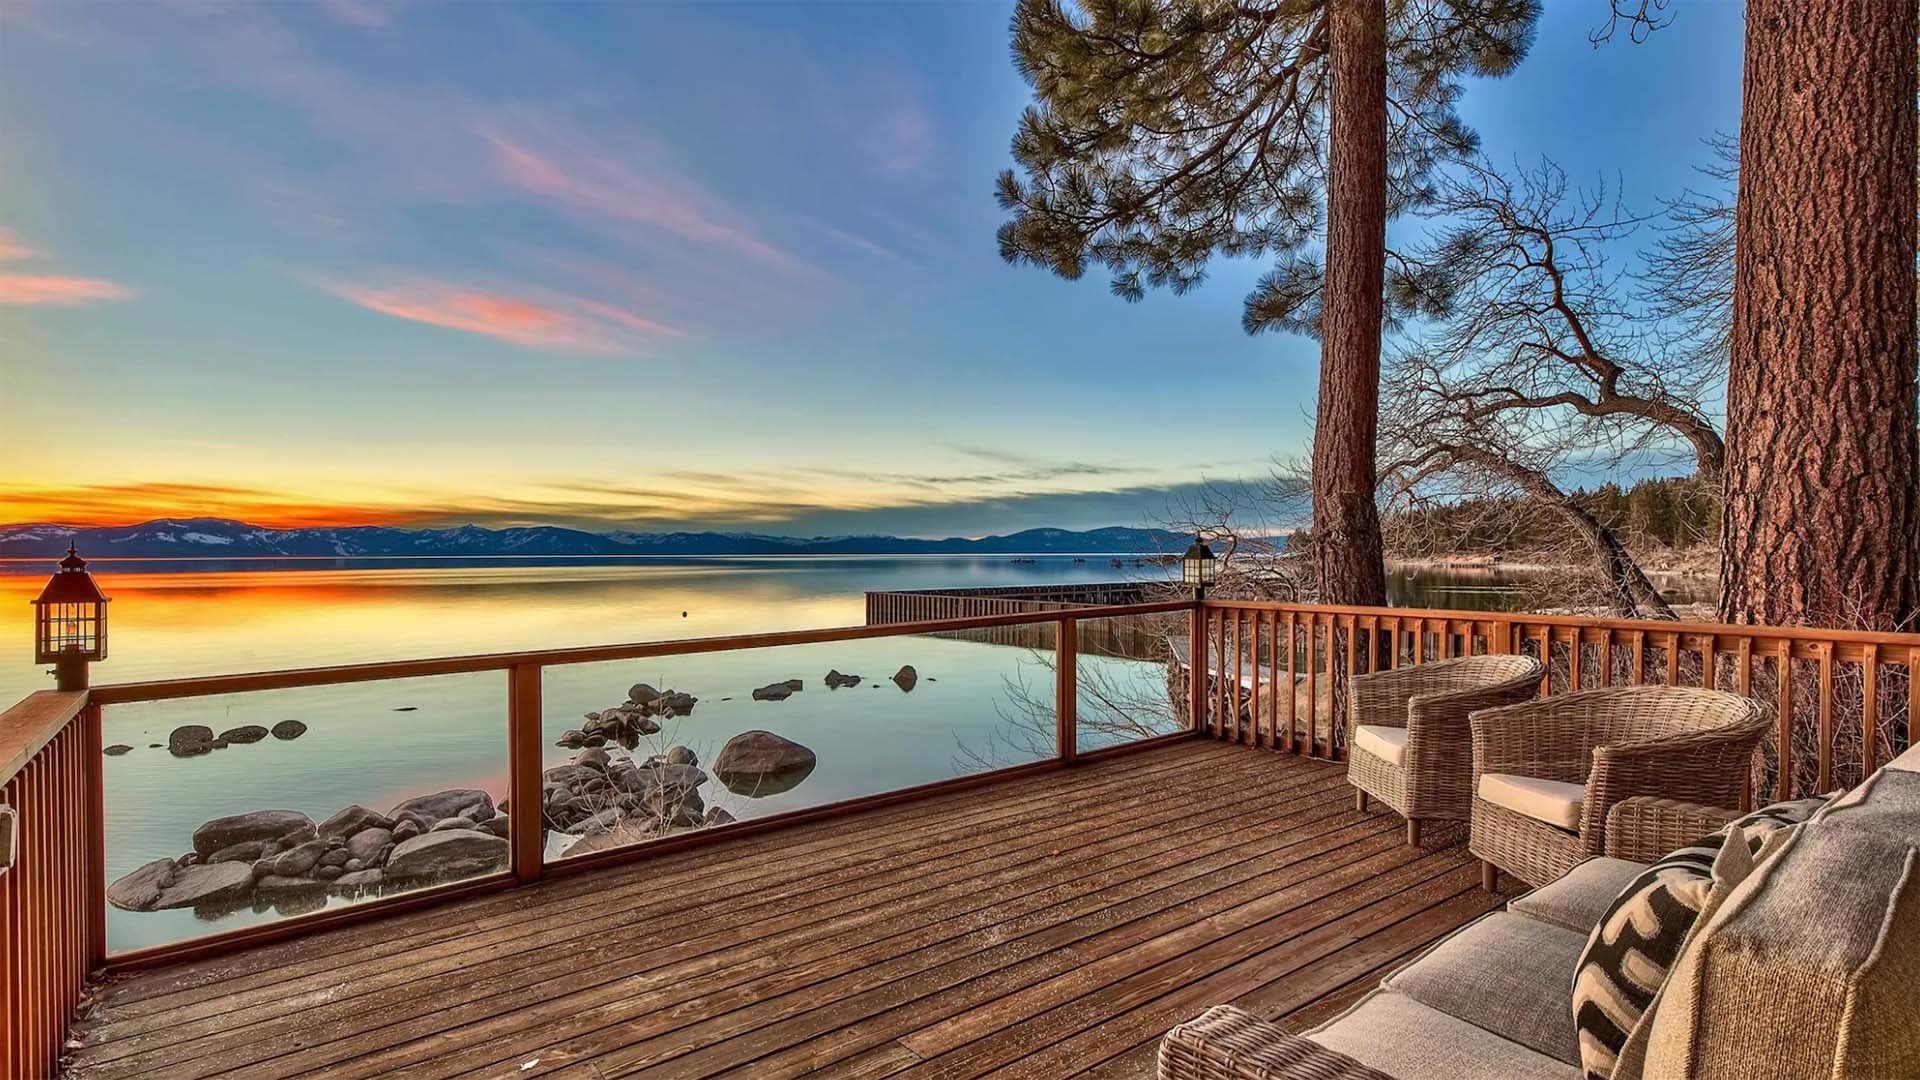 Porch looking out over Lake Tahoe during sunrise.